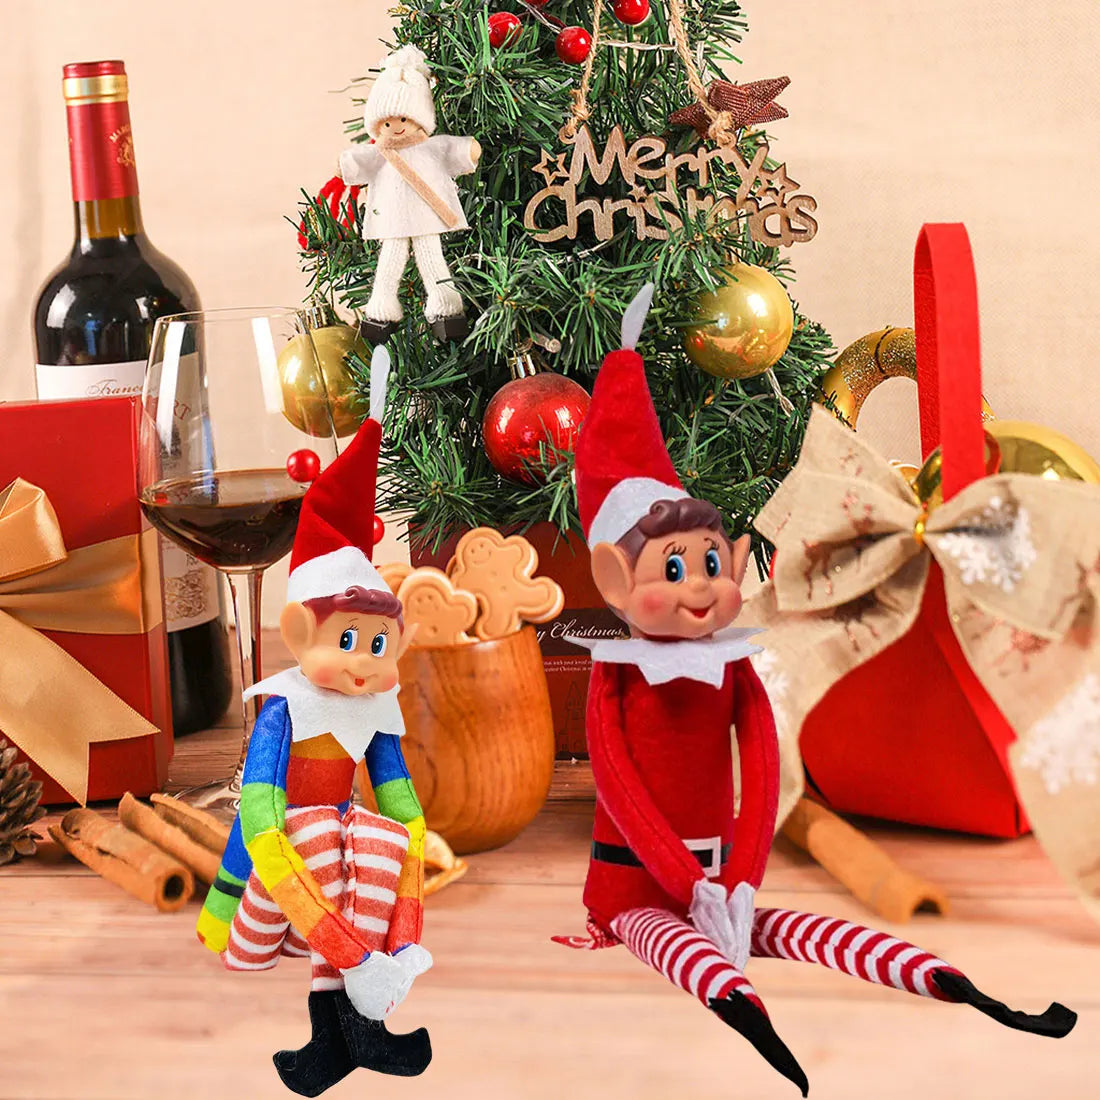 Cute Elf Doll Christmas Decoration Pendant for Xmas Tree or Home Party Gift